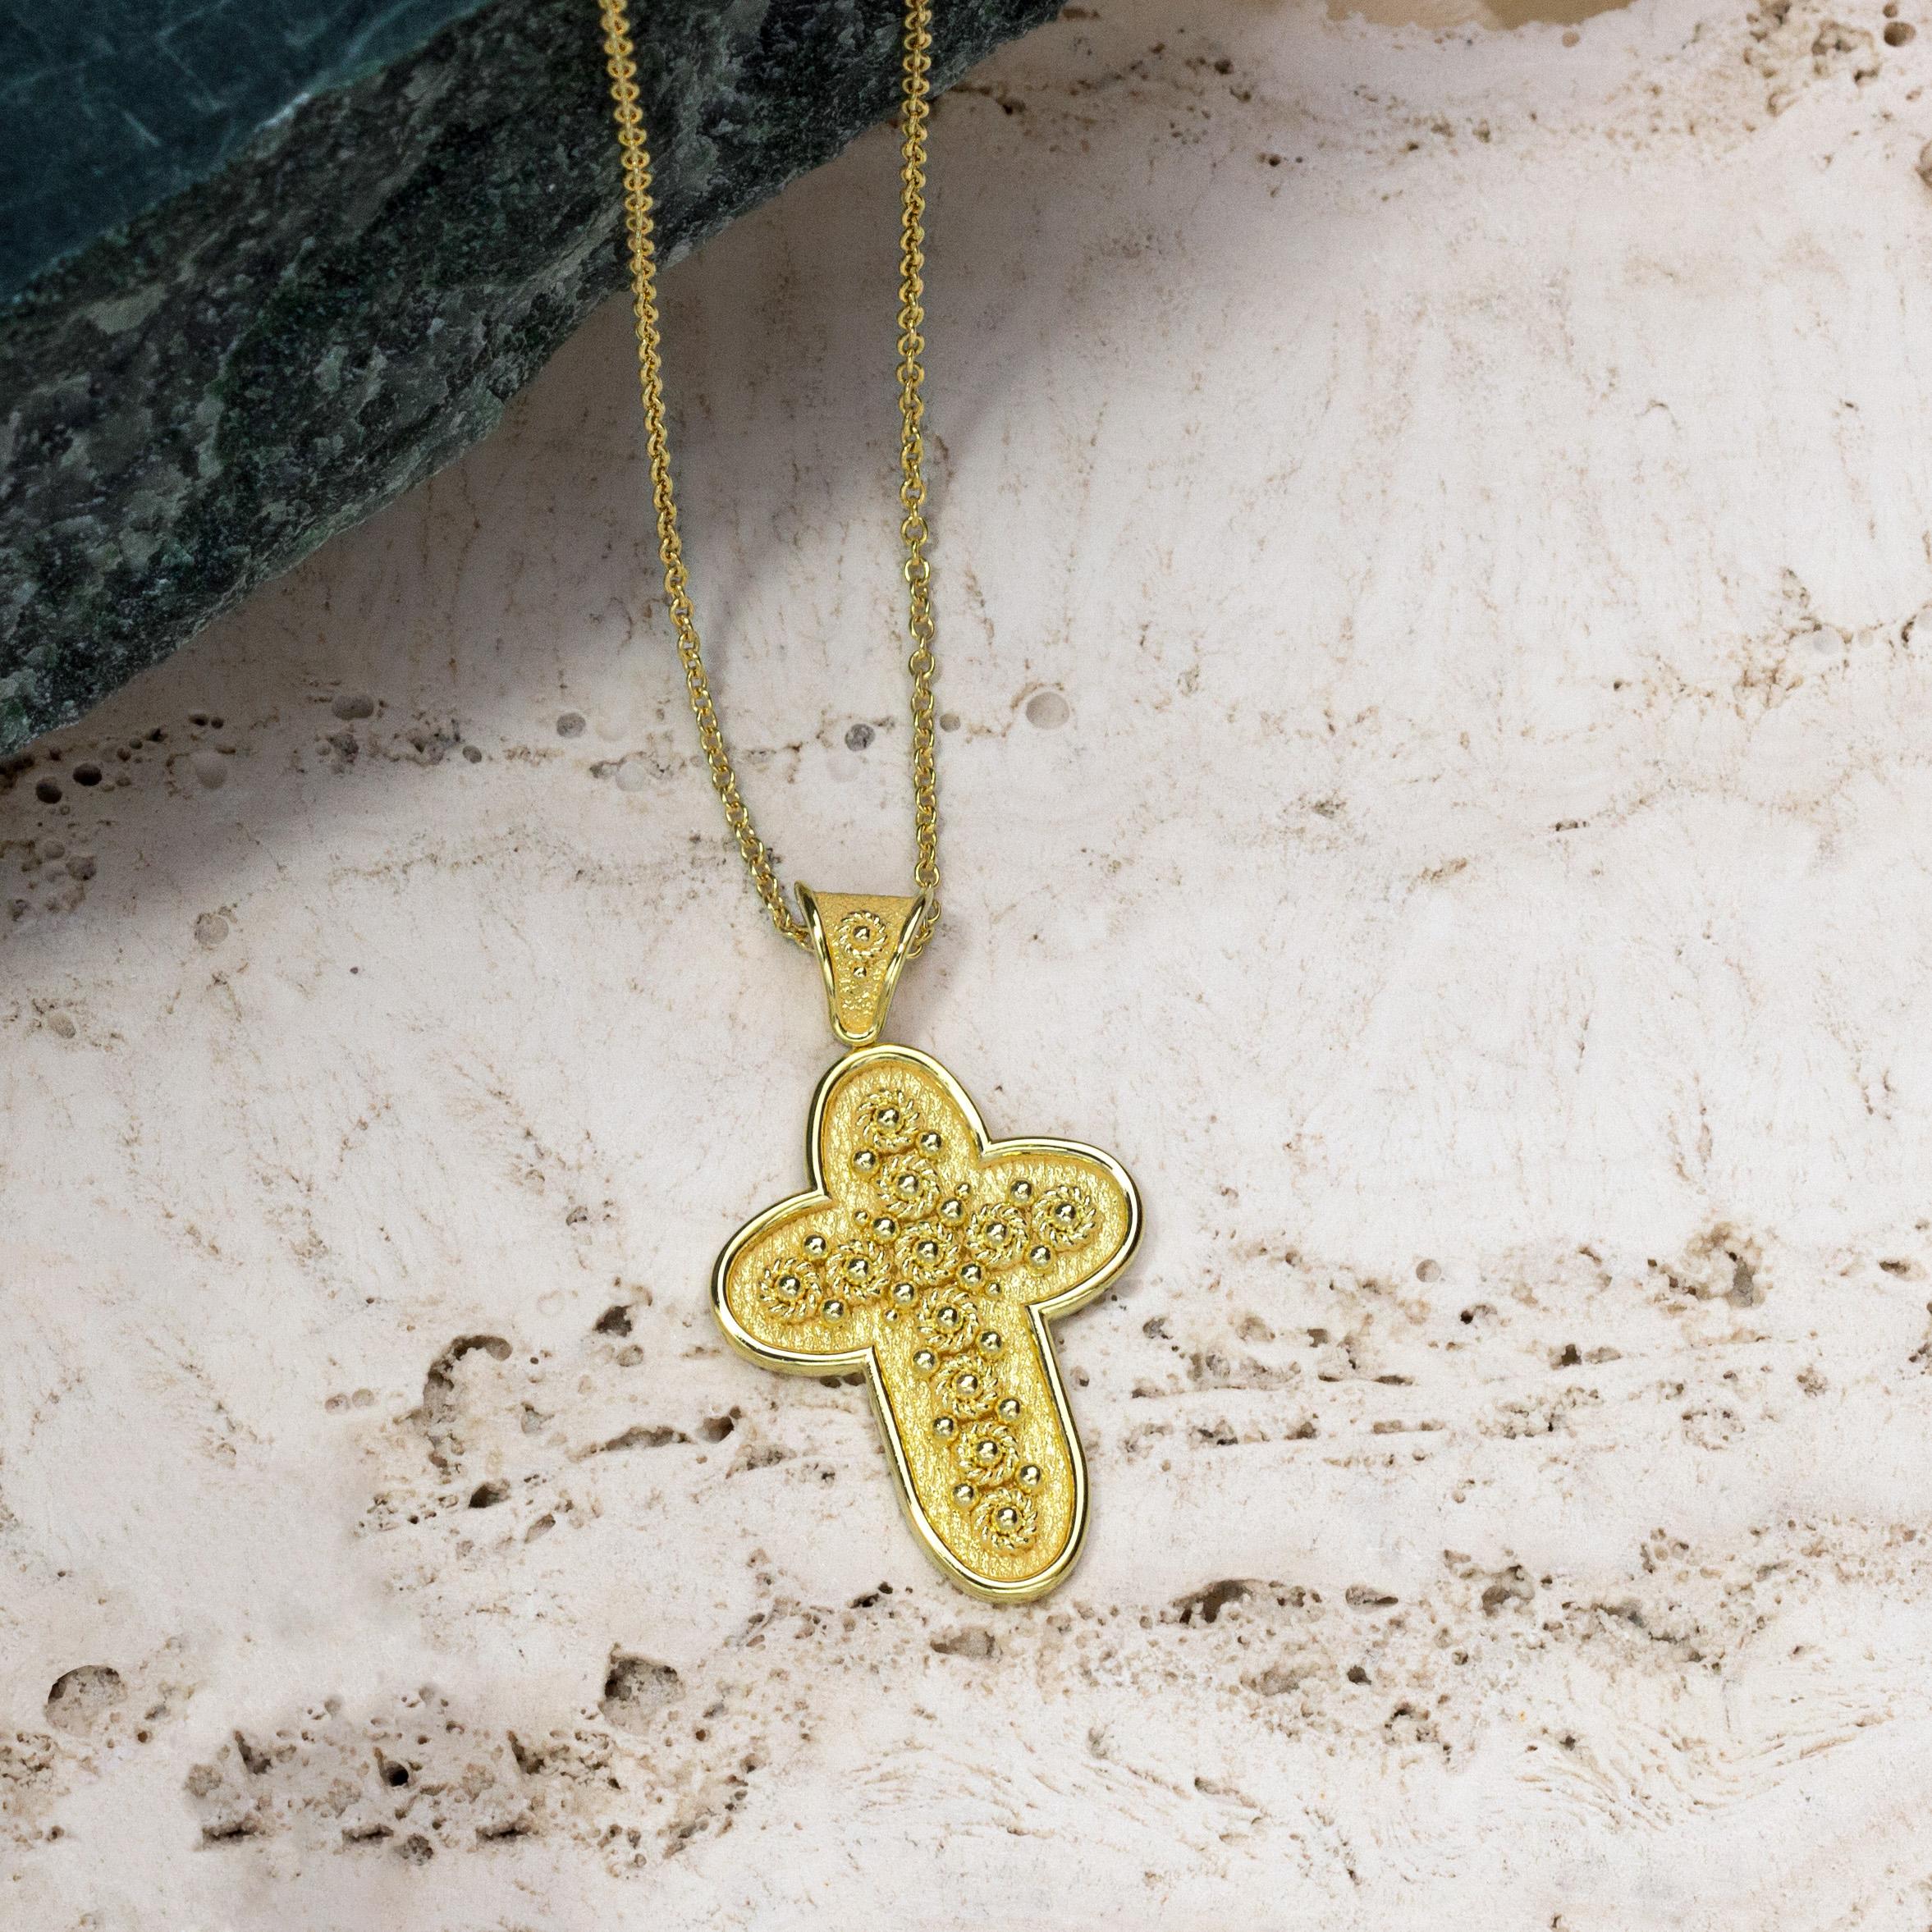 Adorn yourself with a gold cross pendant featuring intricate circle motifs, woven with golden rope and adorned by delicate granulations—a divine symbol of faith and timeless beauty.

100% handmade in our workshop.

Metal: 18K Gold

Every pendant is